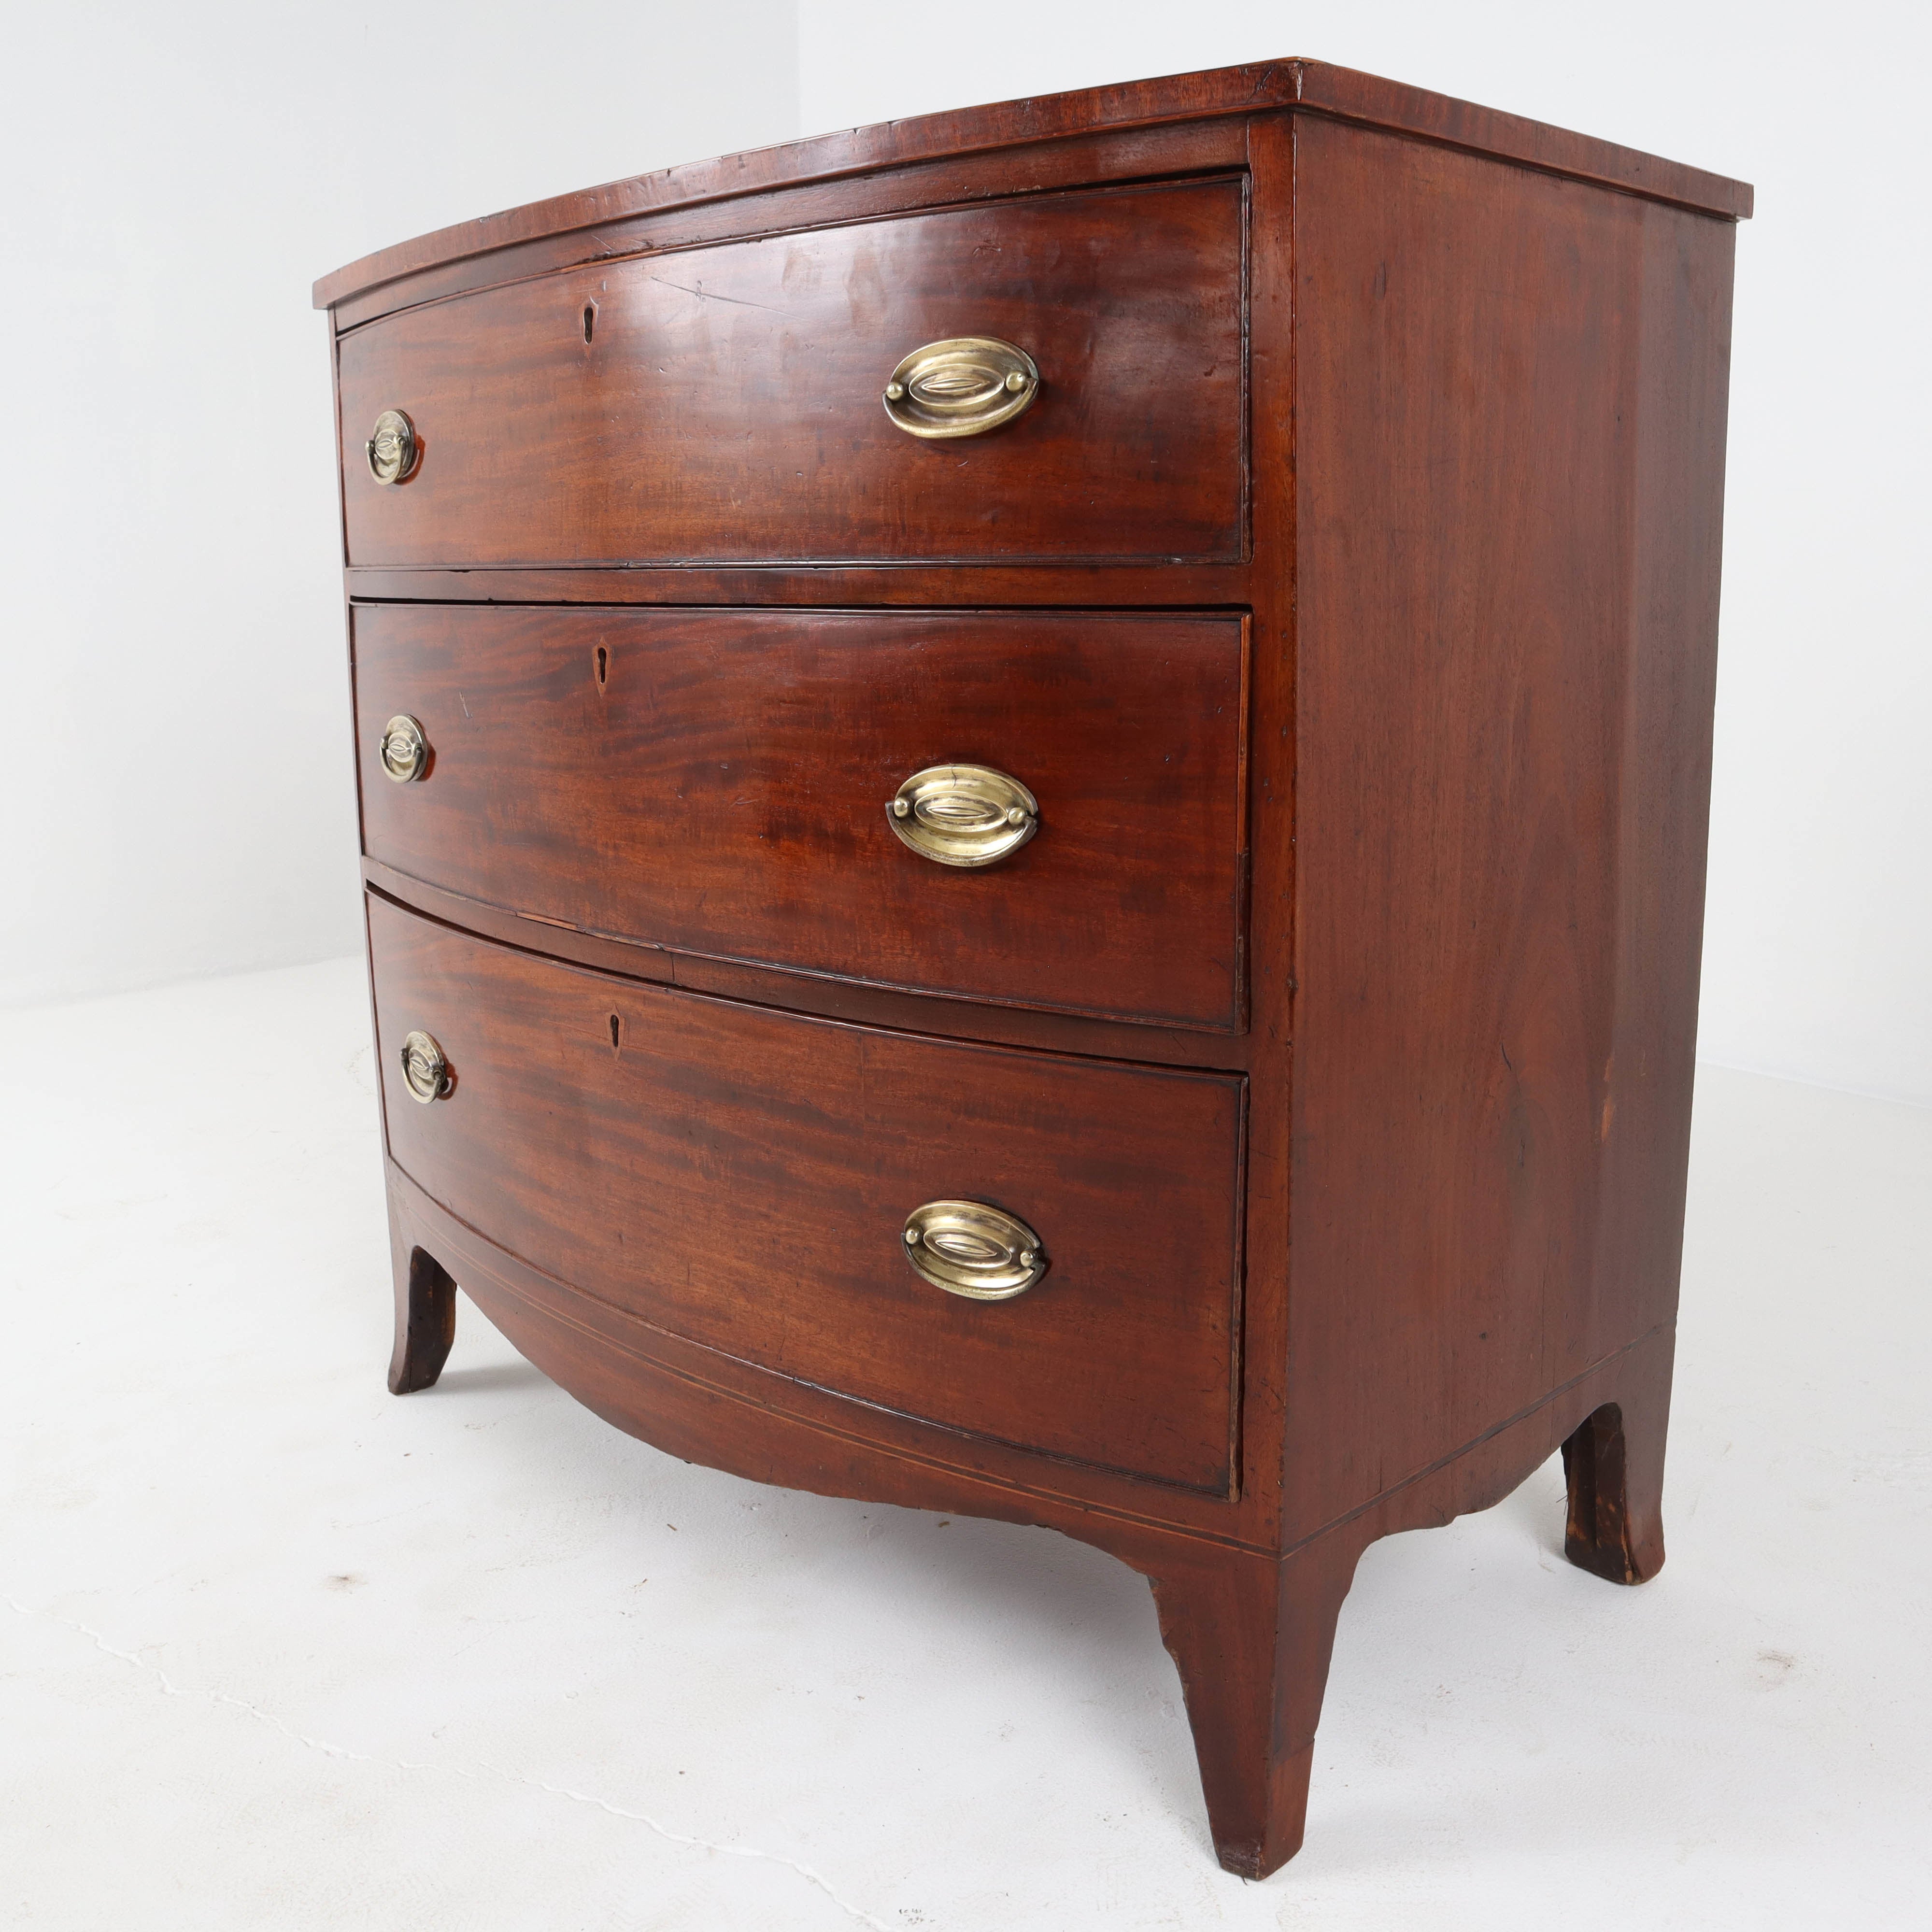 English Victorian Antique Bow Front Chest of Drawers c1860